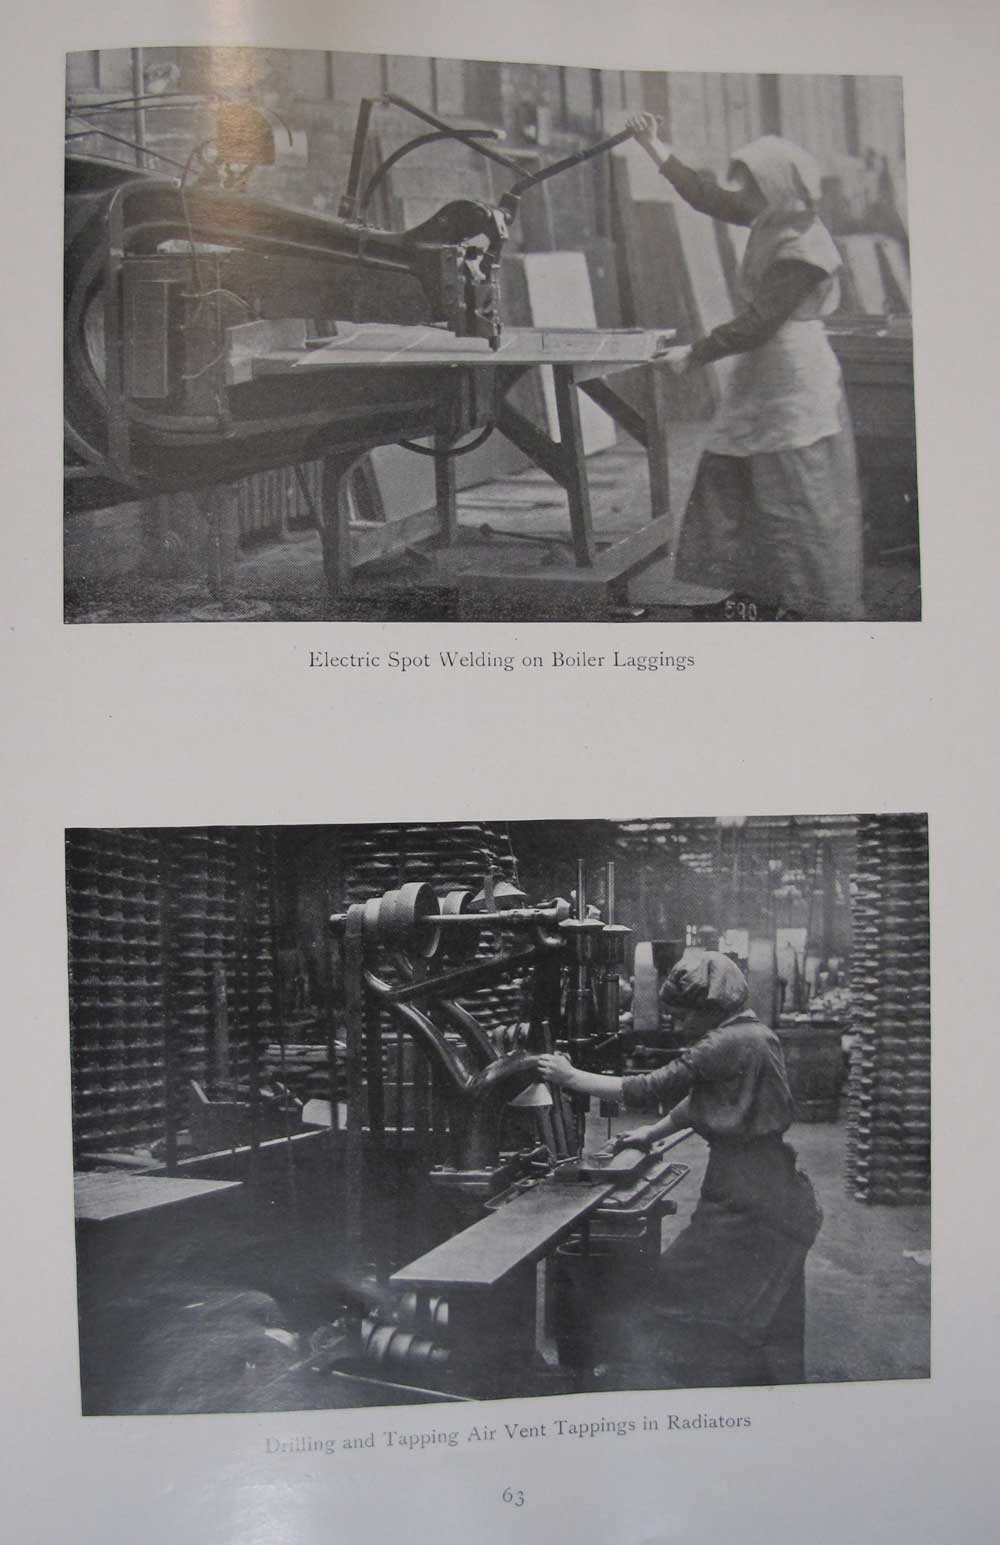 Photographs showing successful substitution of women for men from Women's War Work booklet (MH 47/142)